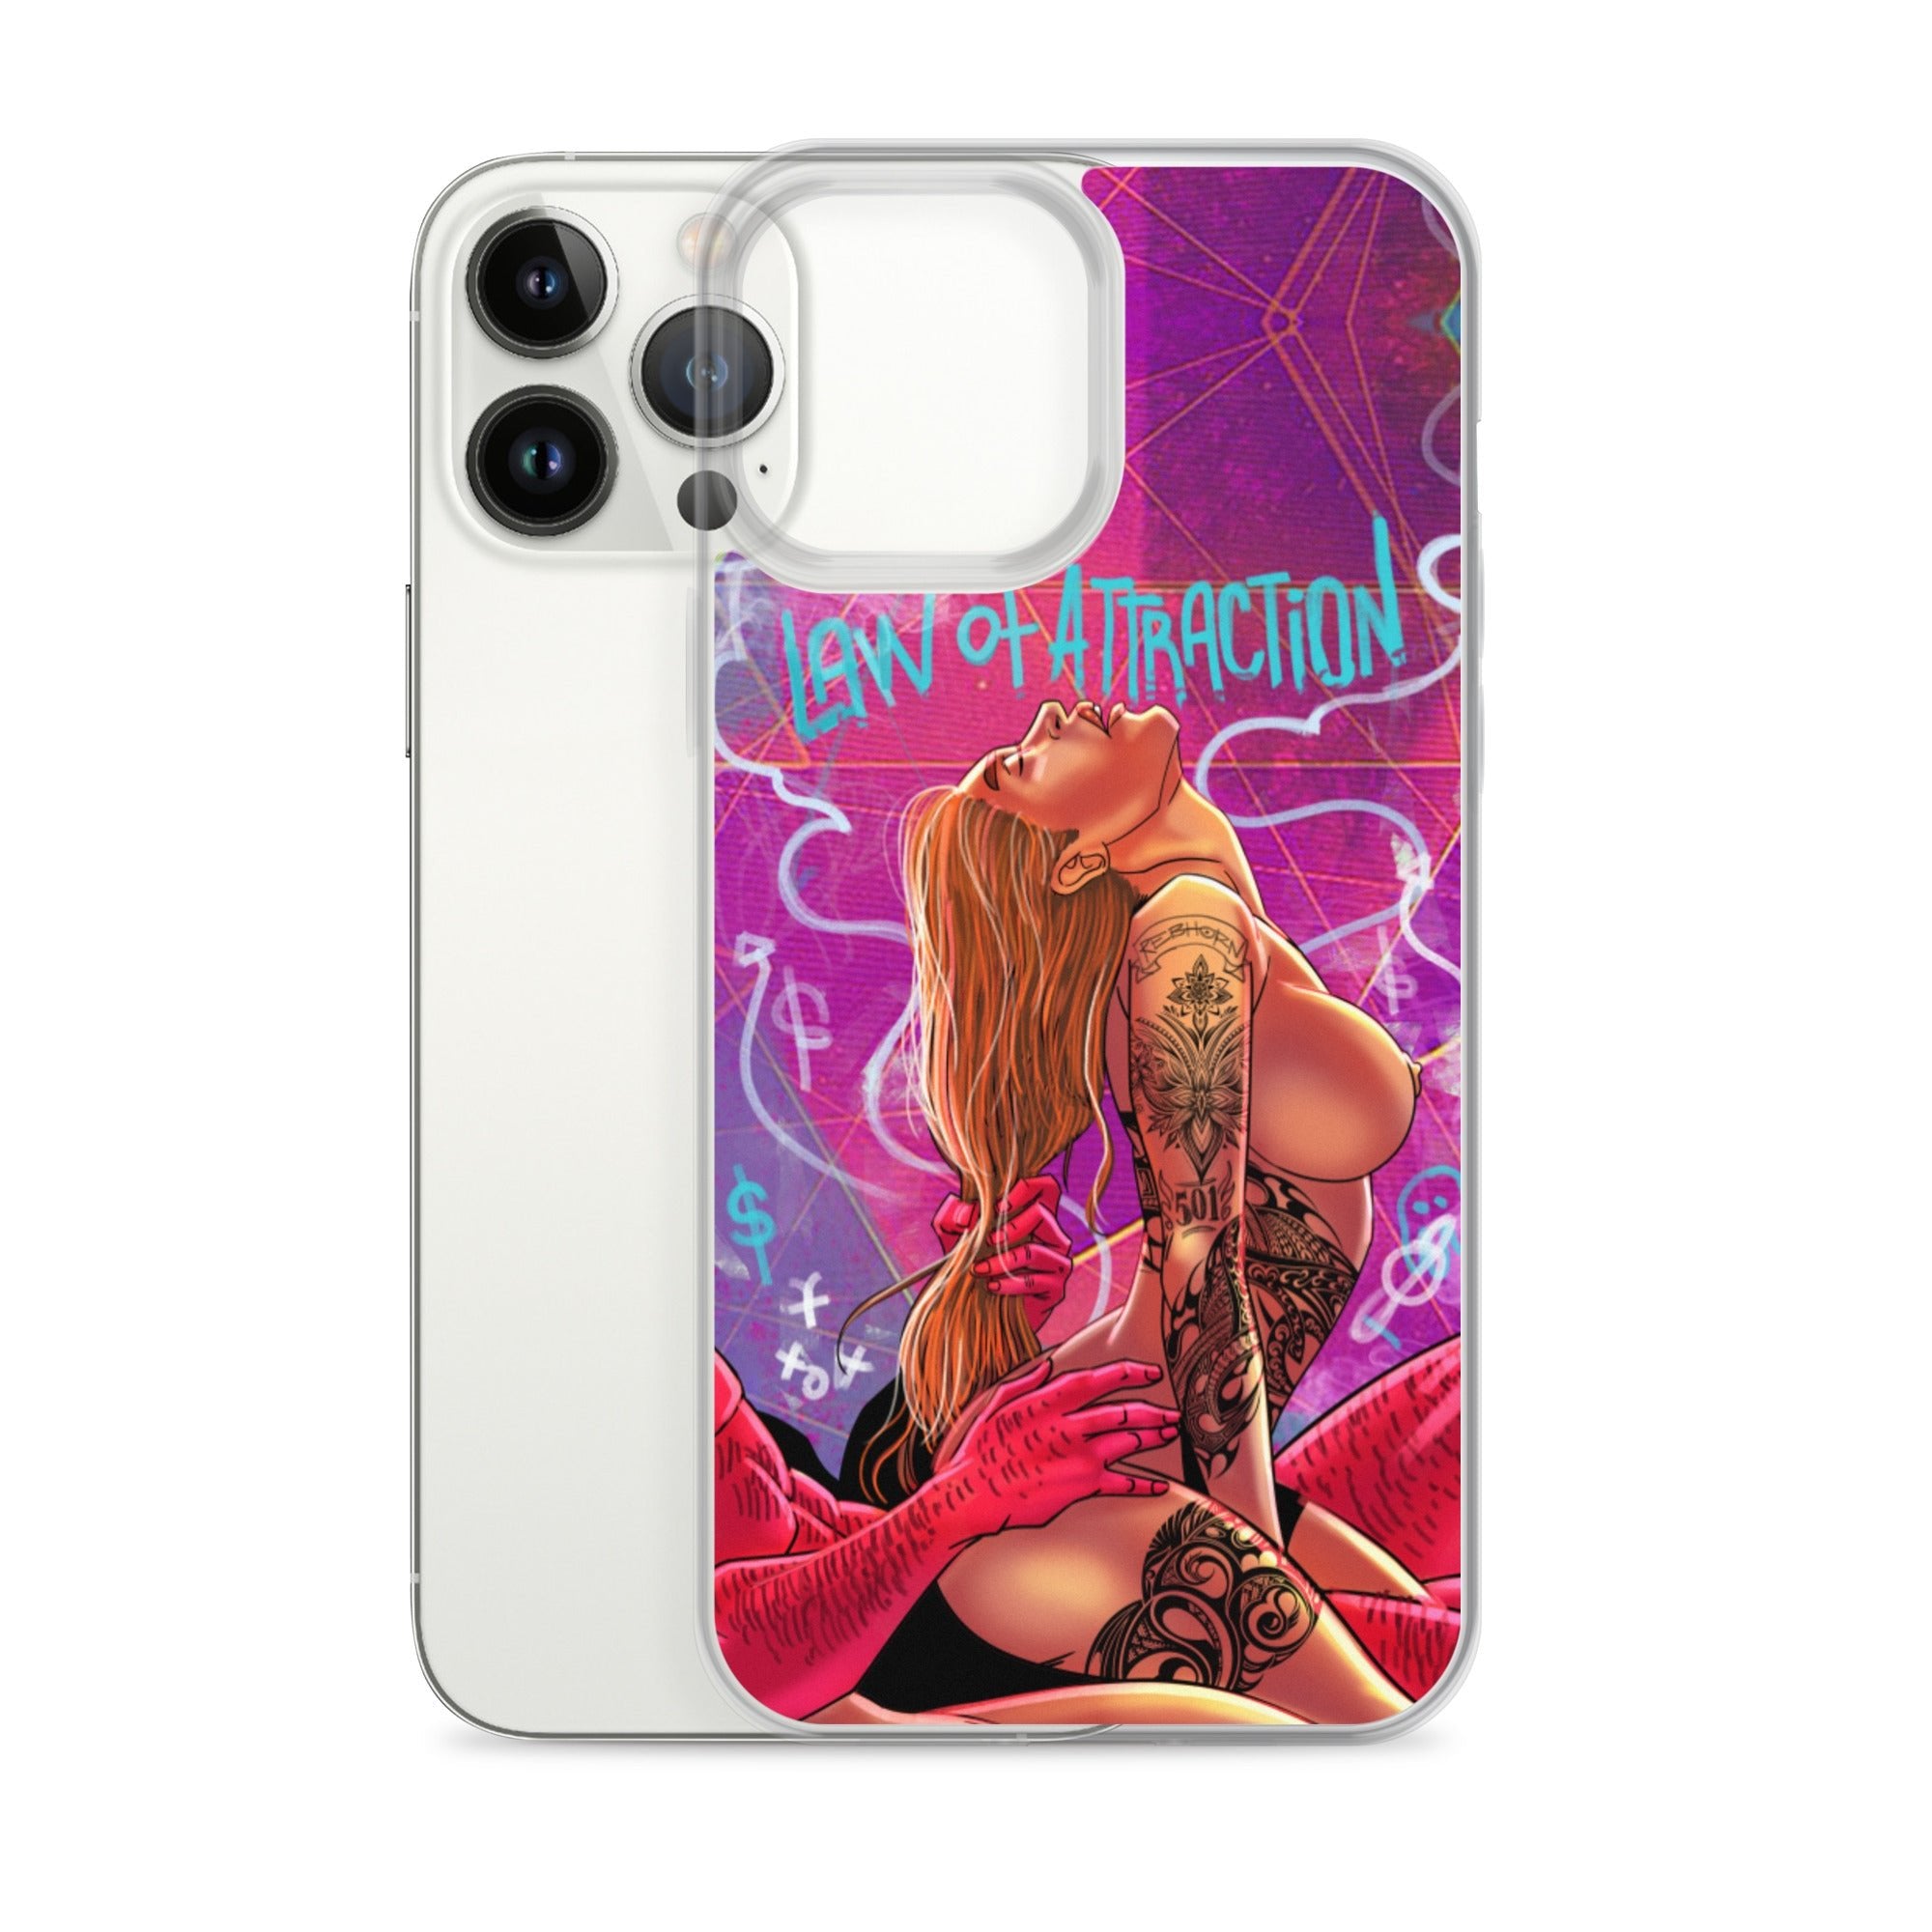 LAW OF ATTRACTION iPHONE CASE - REBHORN DESIGN